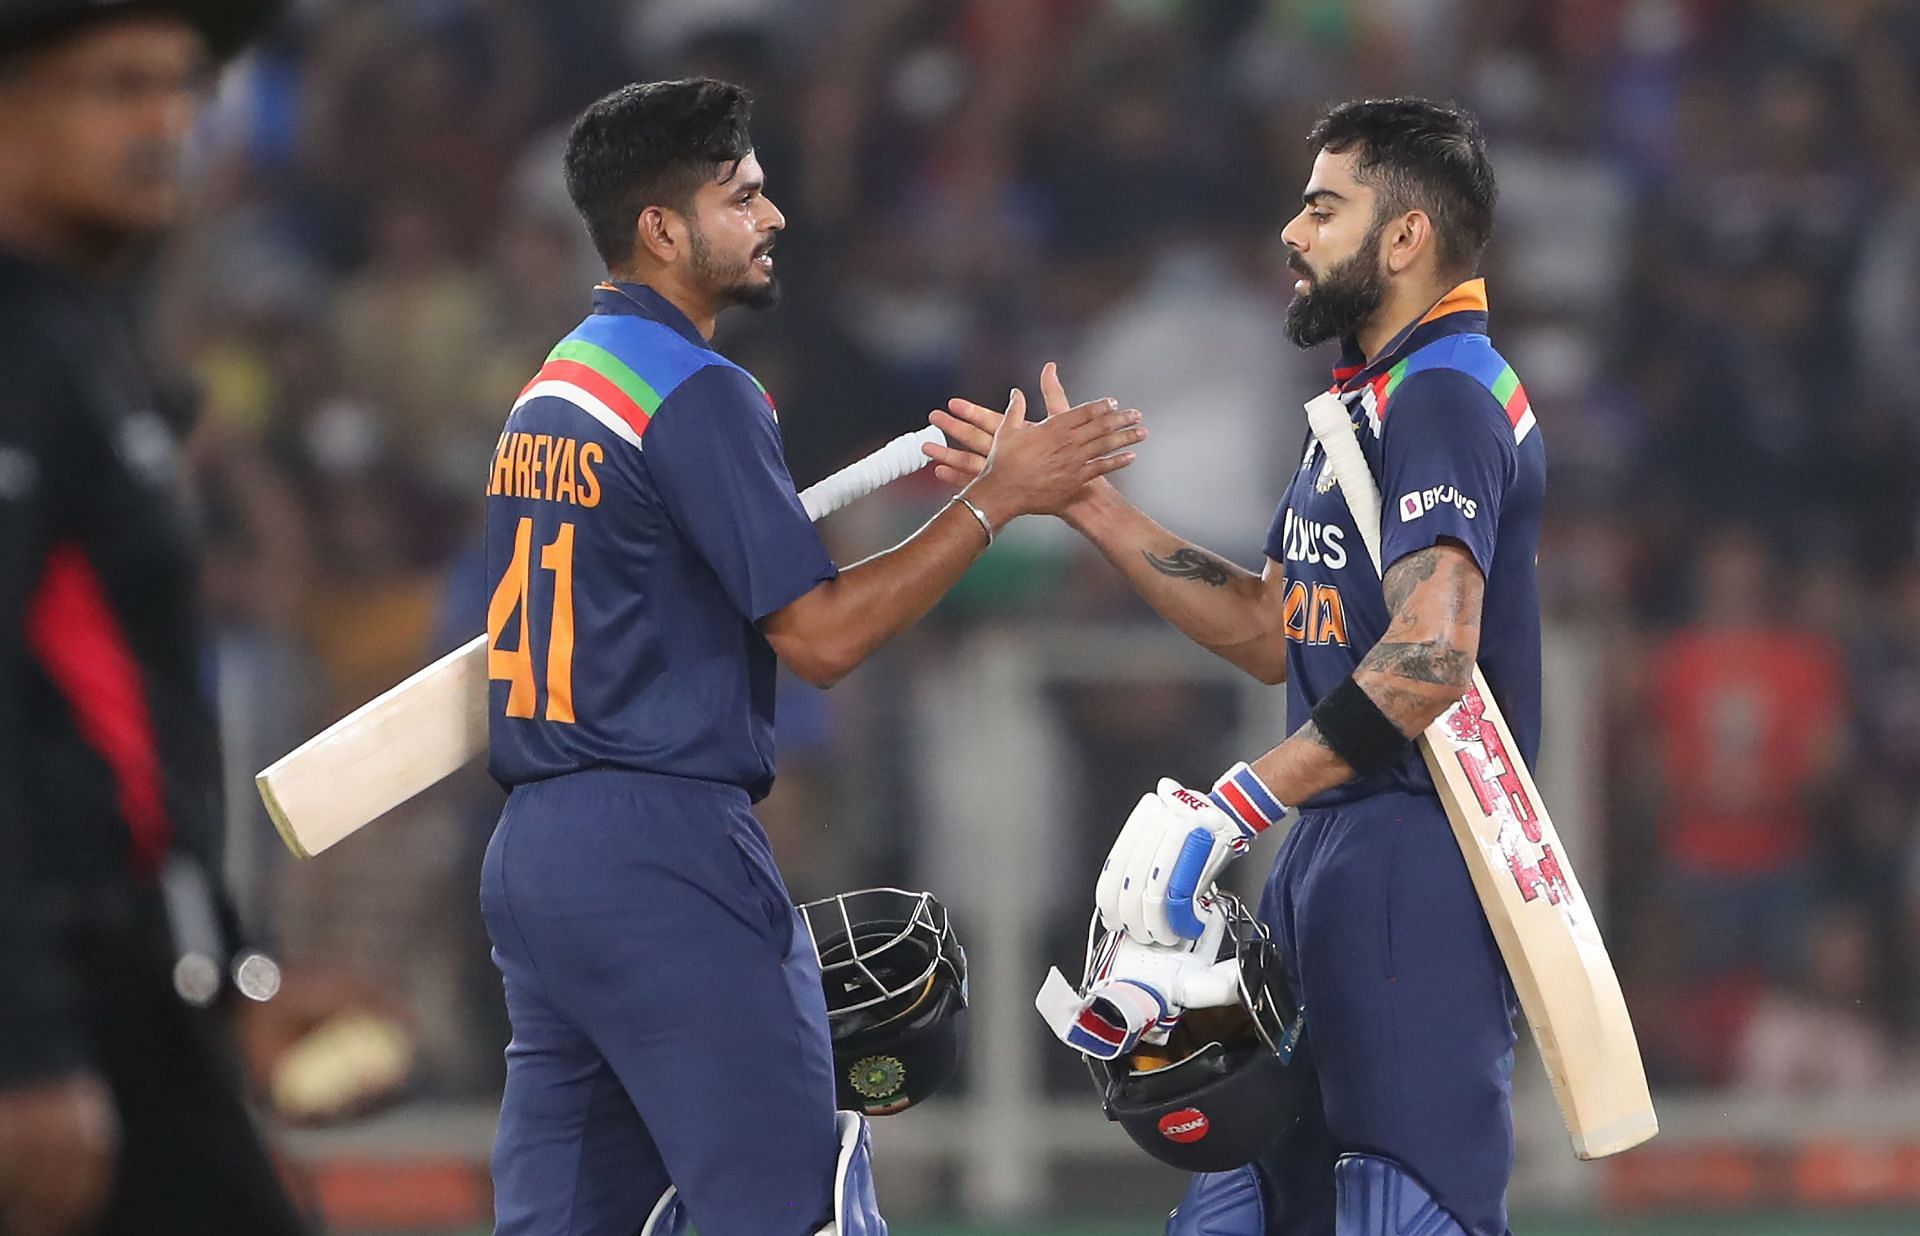 India have a few questions to answer in the ODI series